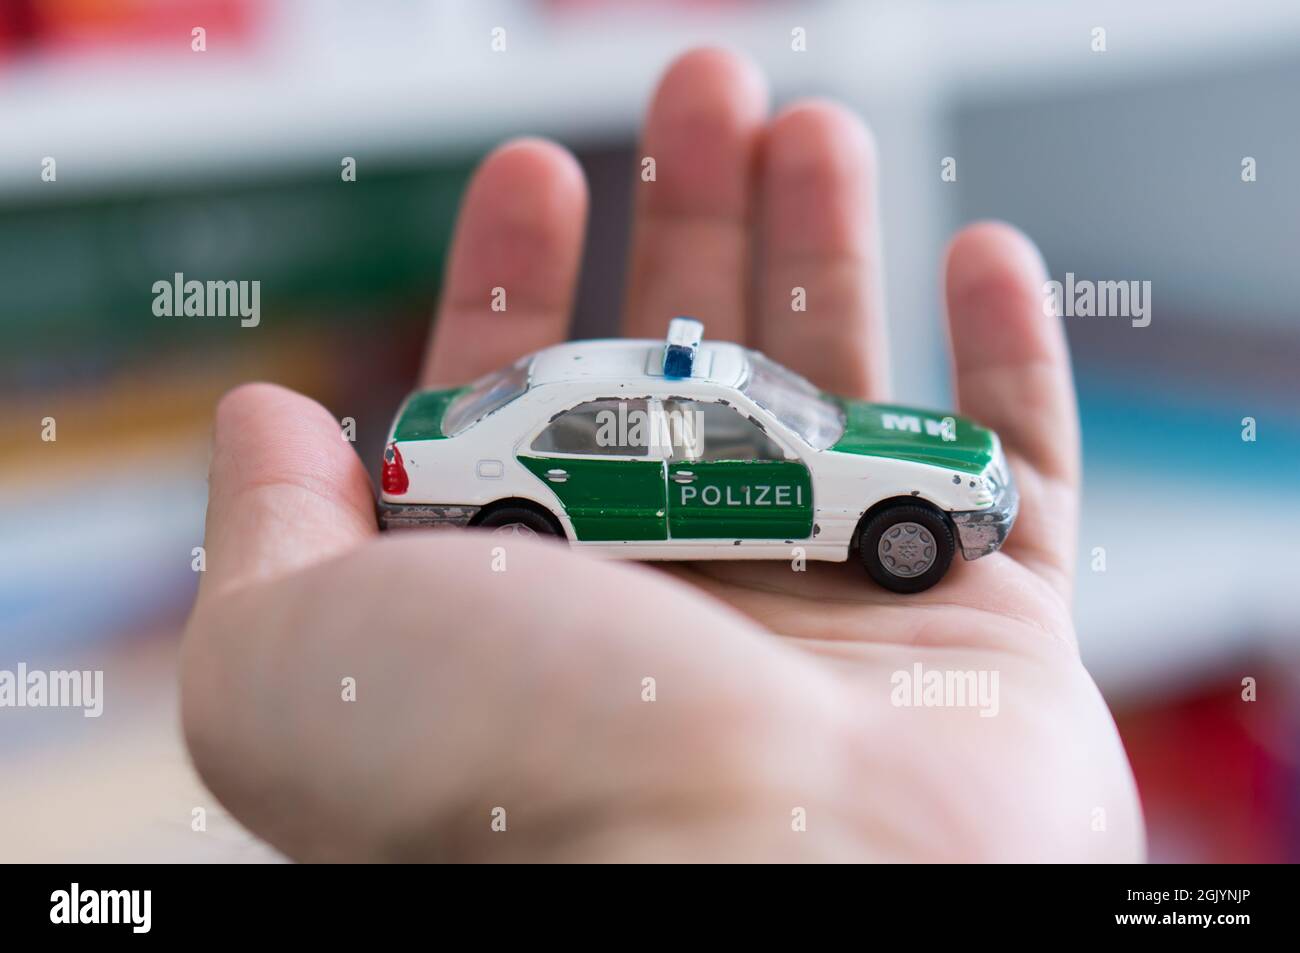 POZNAN, POLAND - Mar 25, 2018: A Siku brand toy German police car on an open hand in soft focus Stock Photo